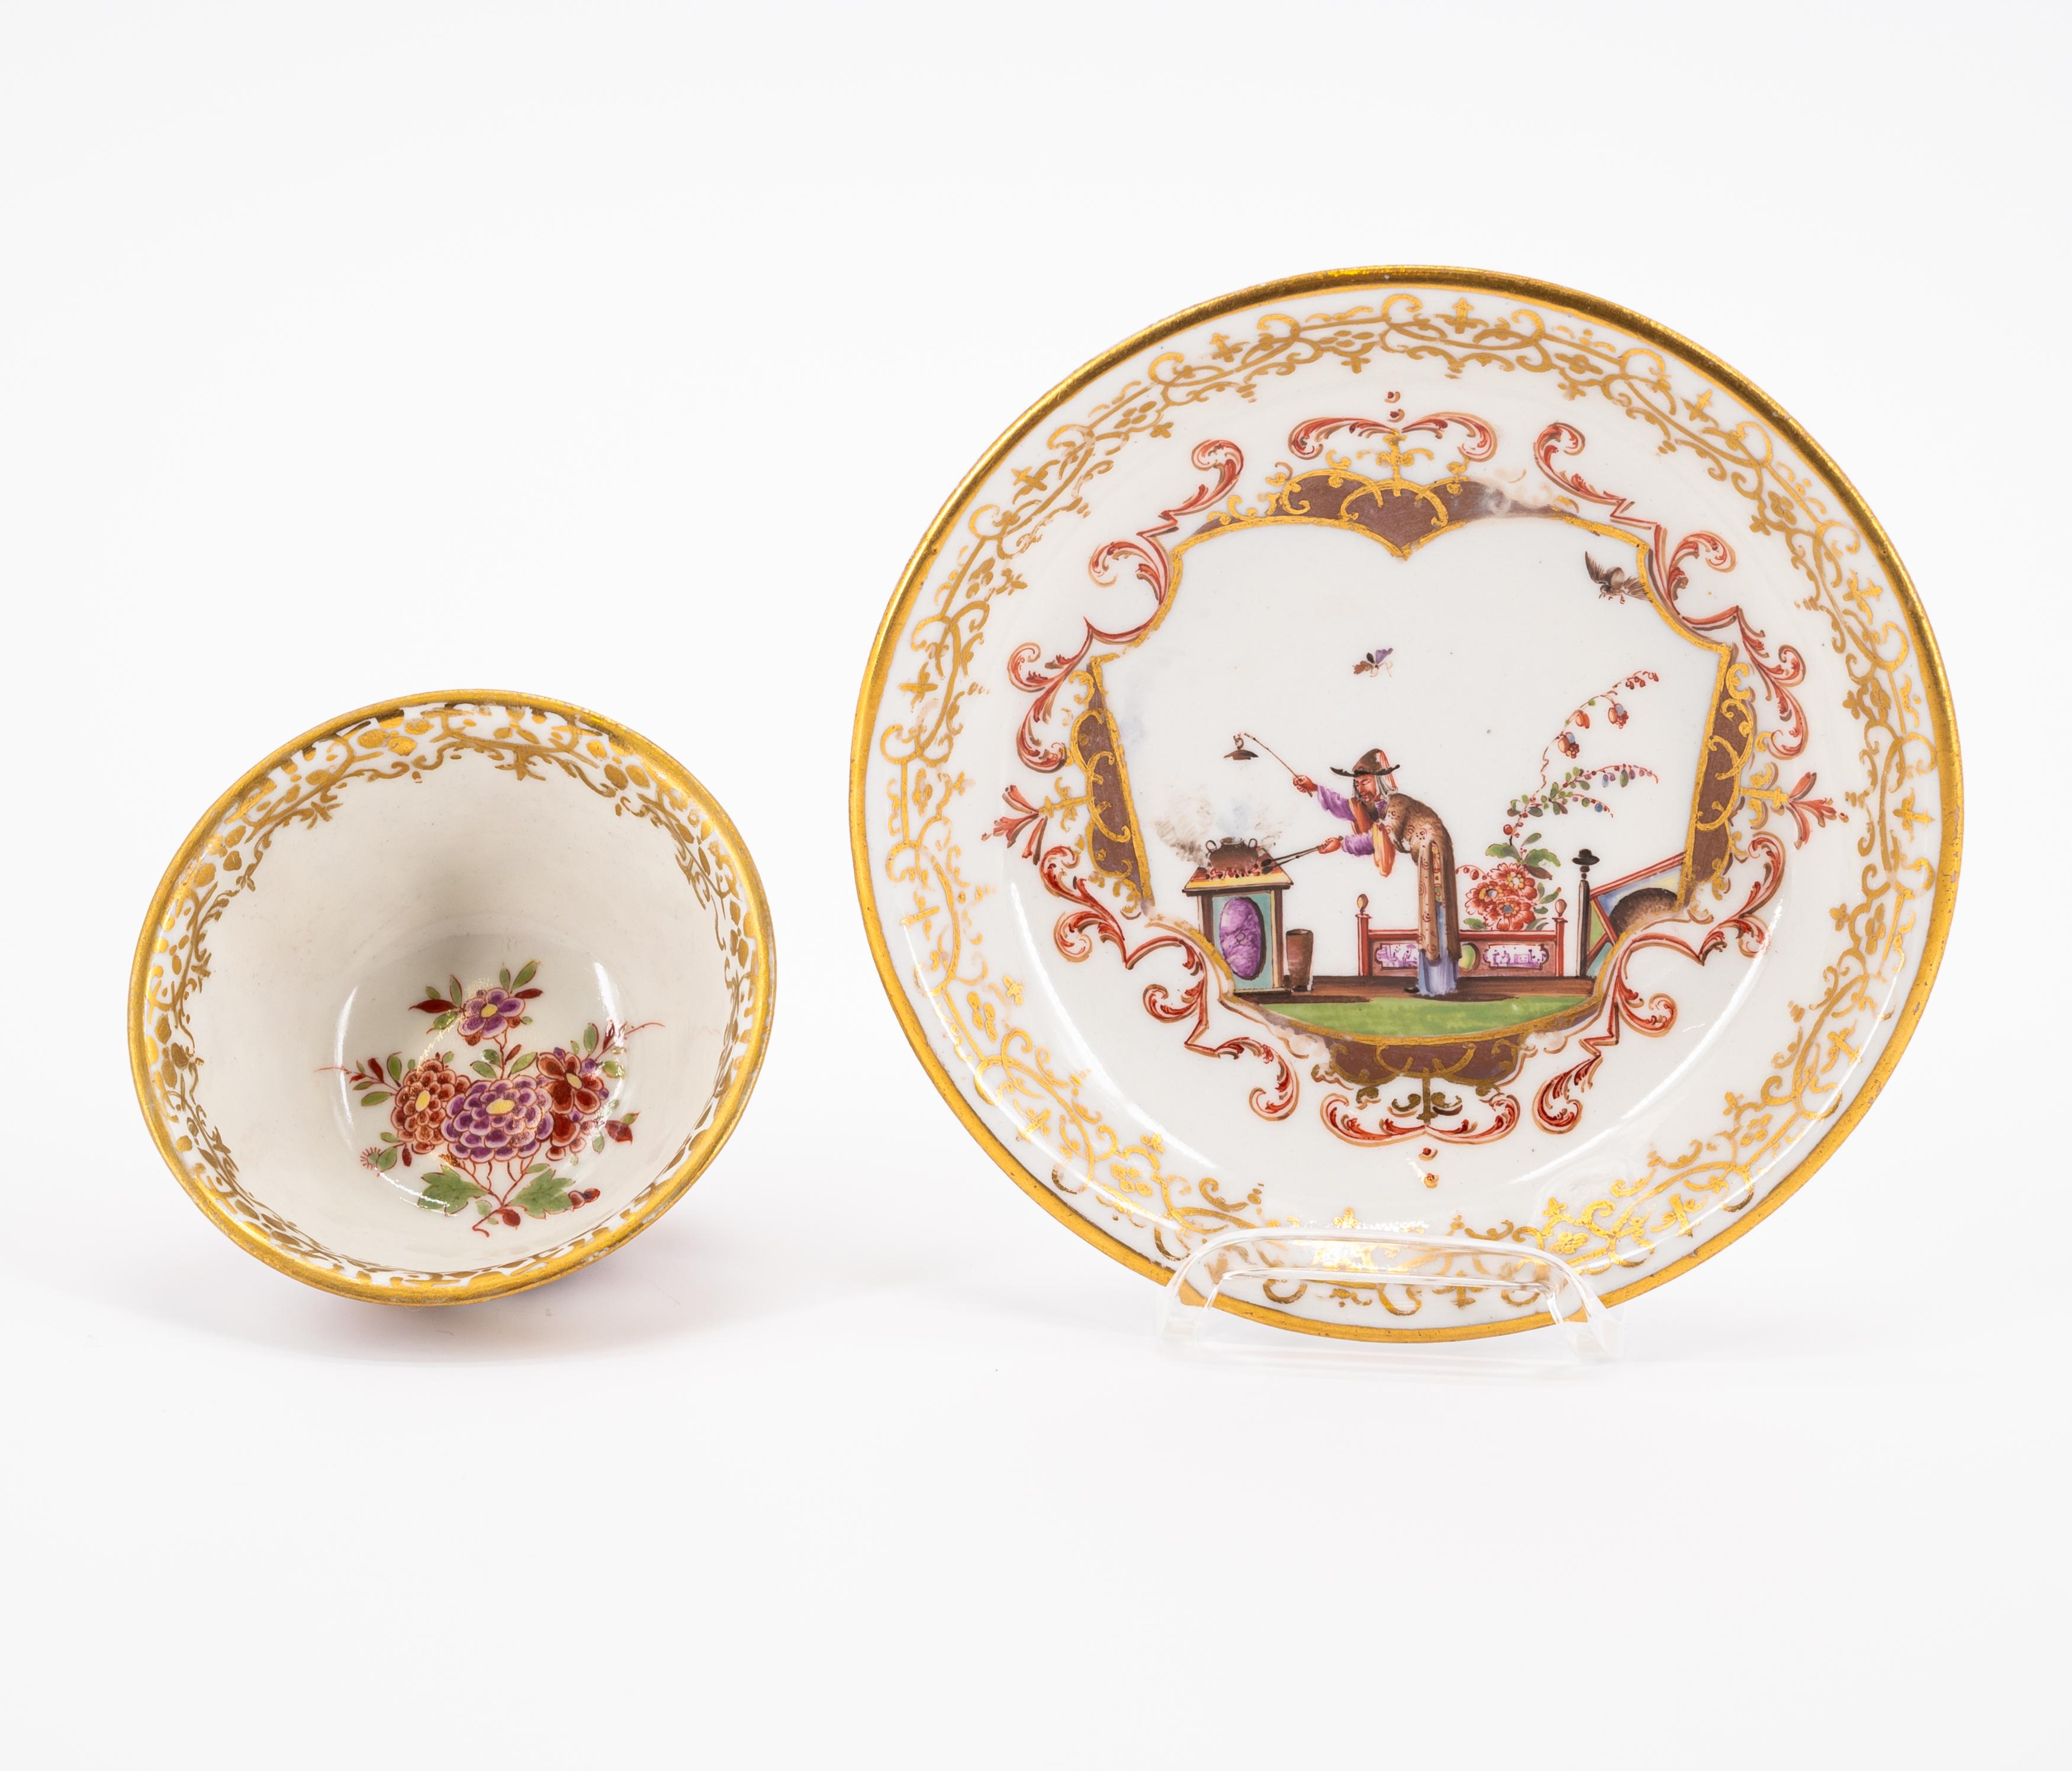 TWO PORCELAIN TEA BOWLS WITH SAUERES AND CHINOISERIES - Image 5 of 11